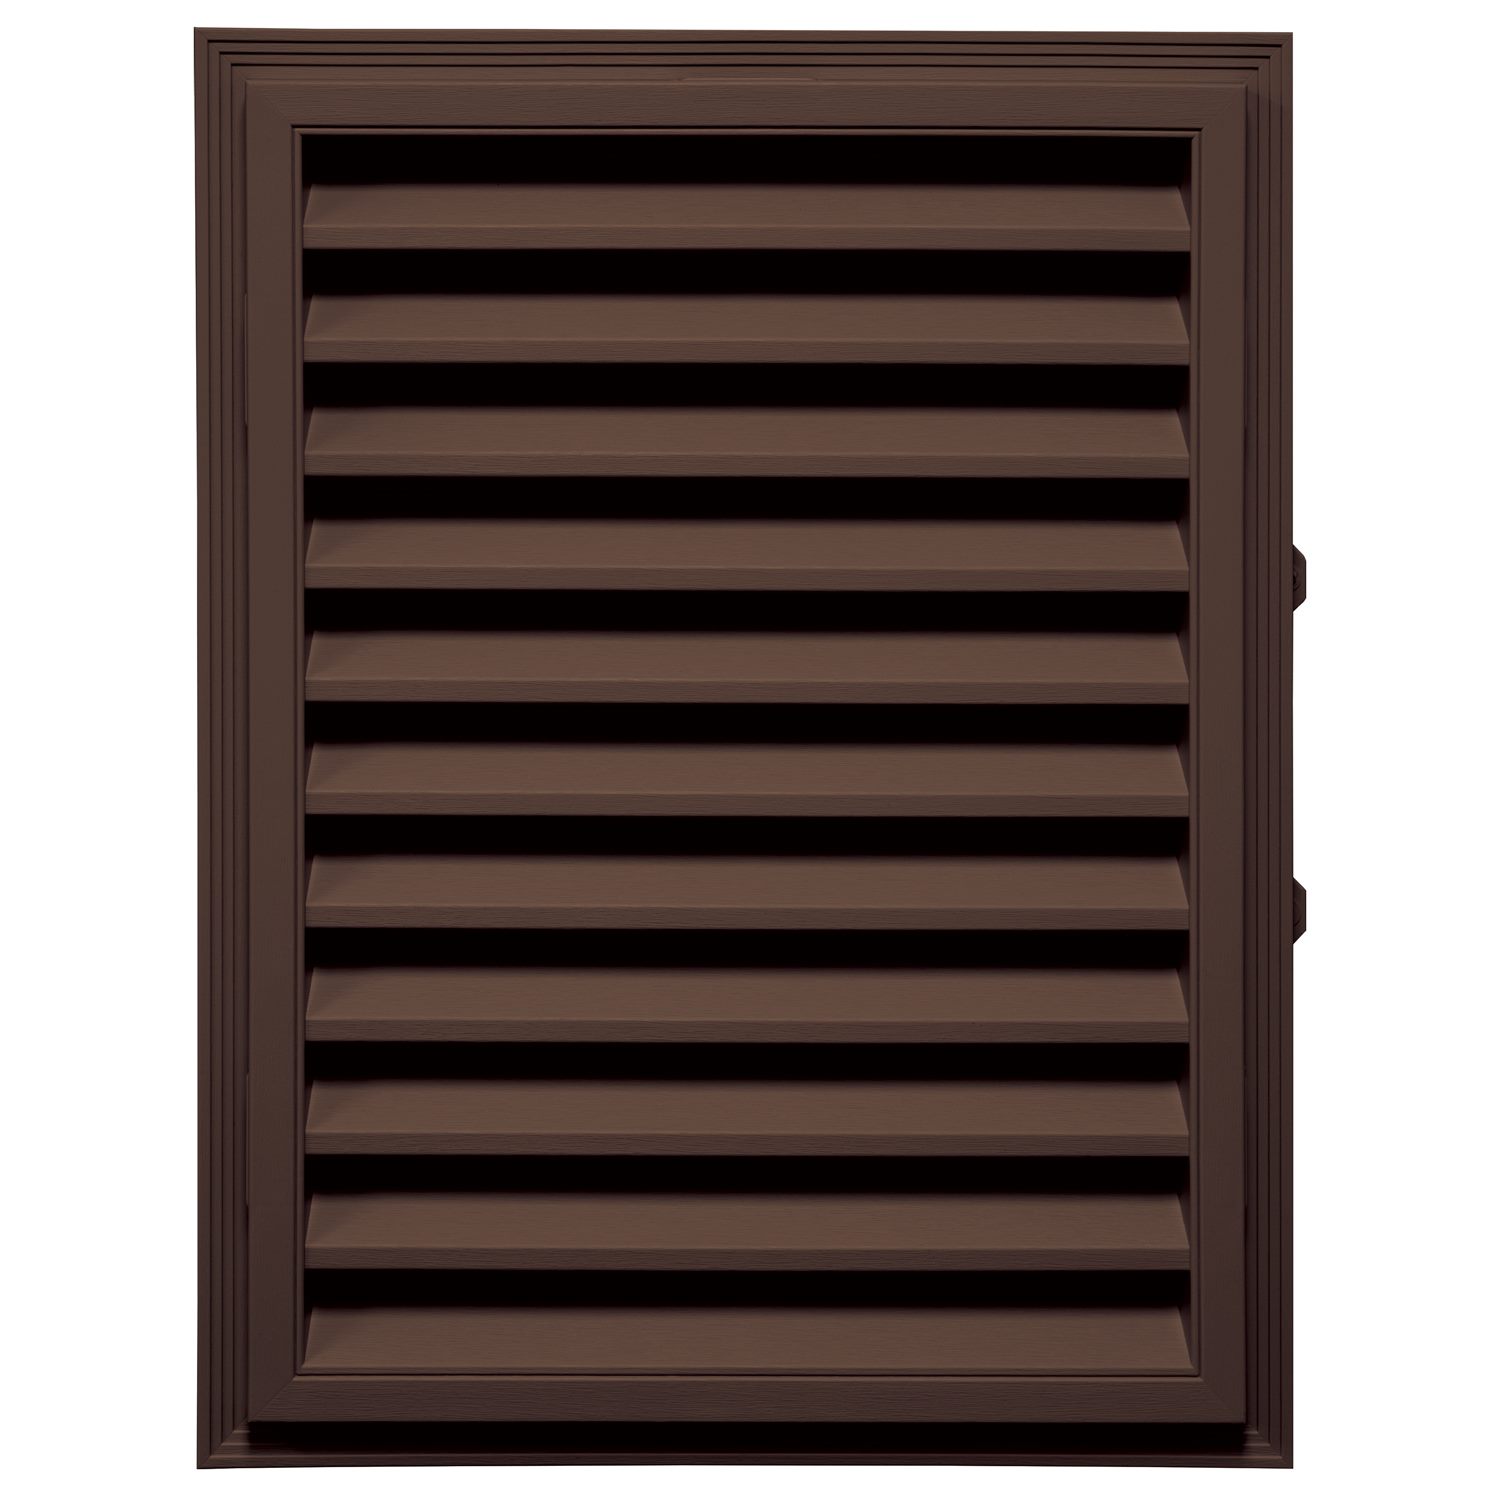 18in. x 24in. - 009 Federal Brown